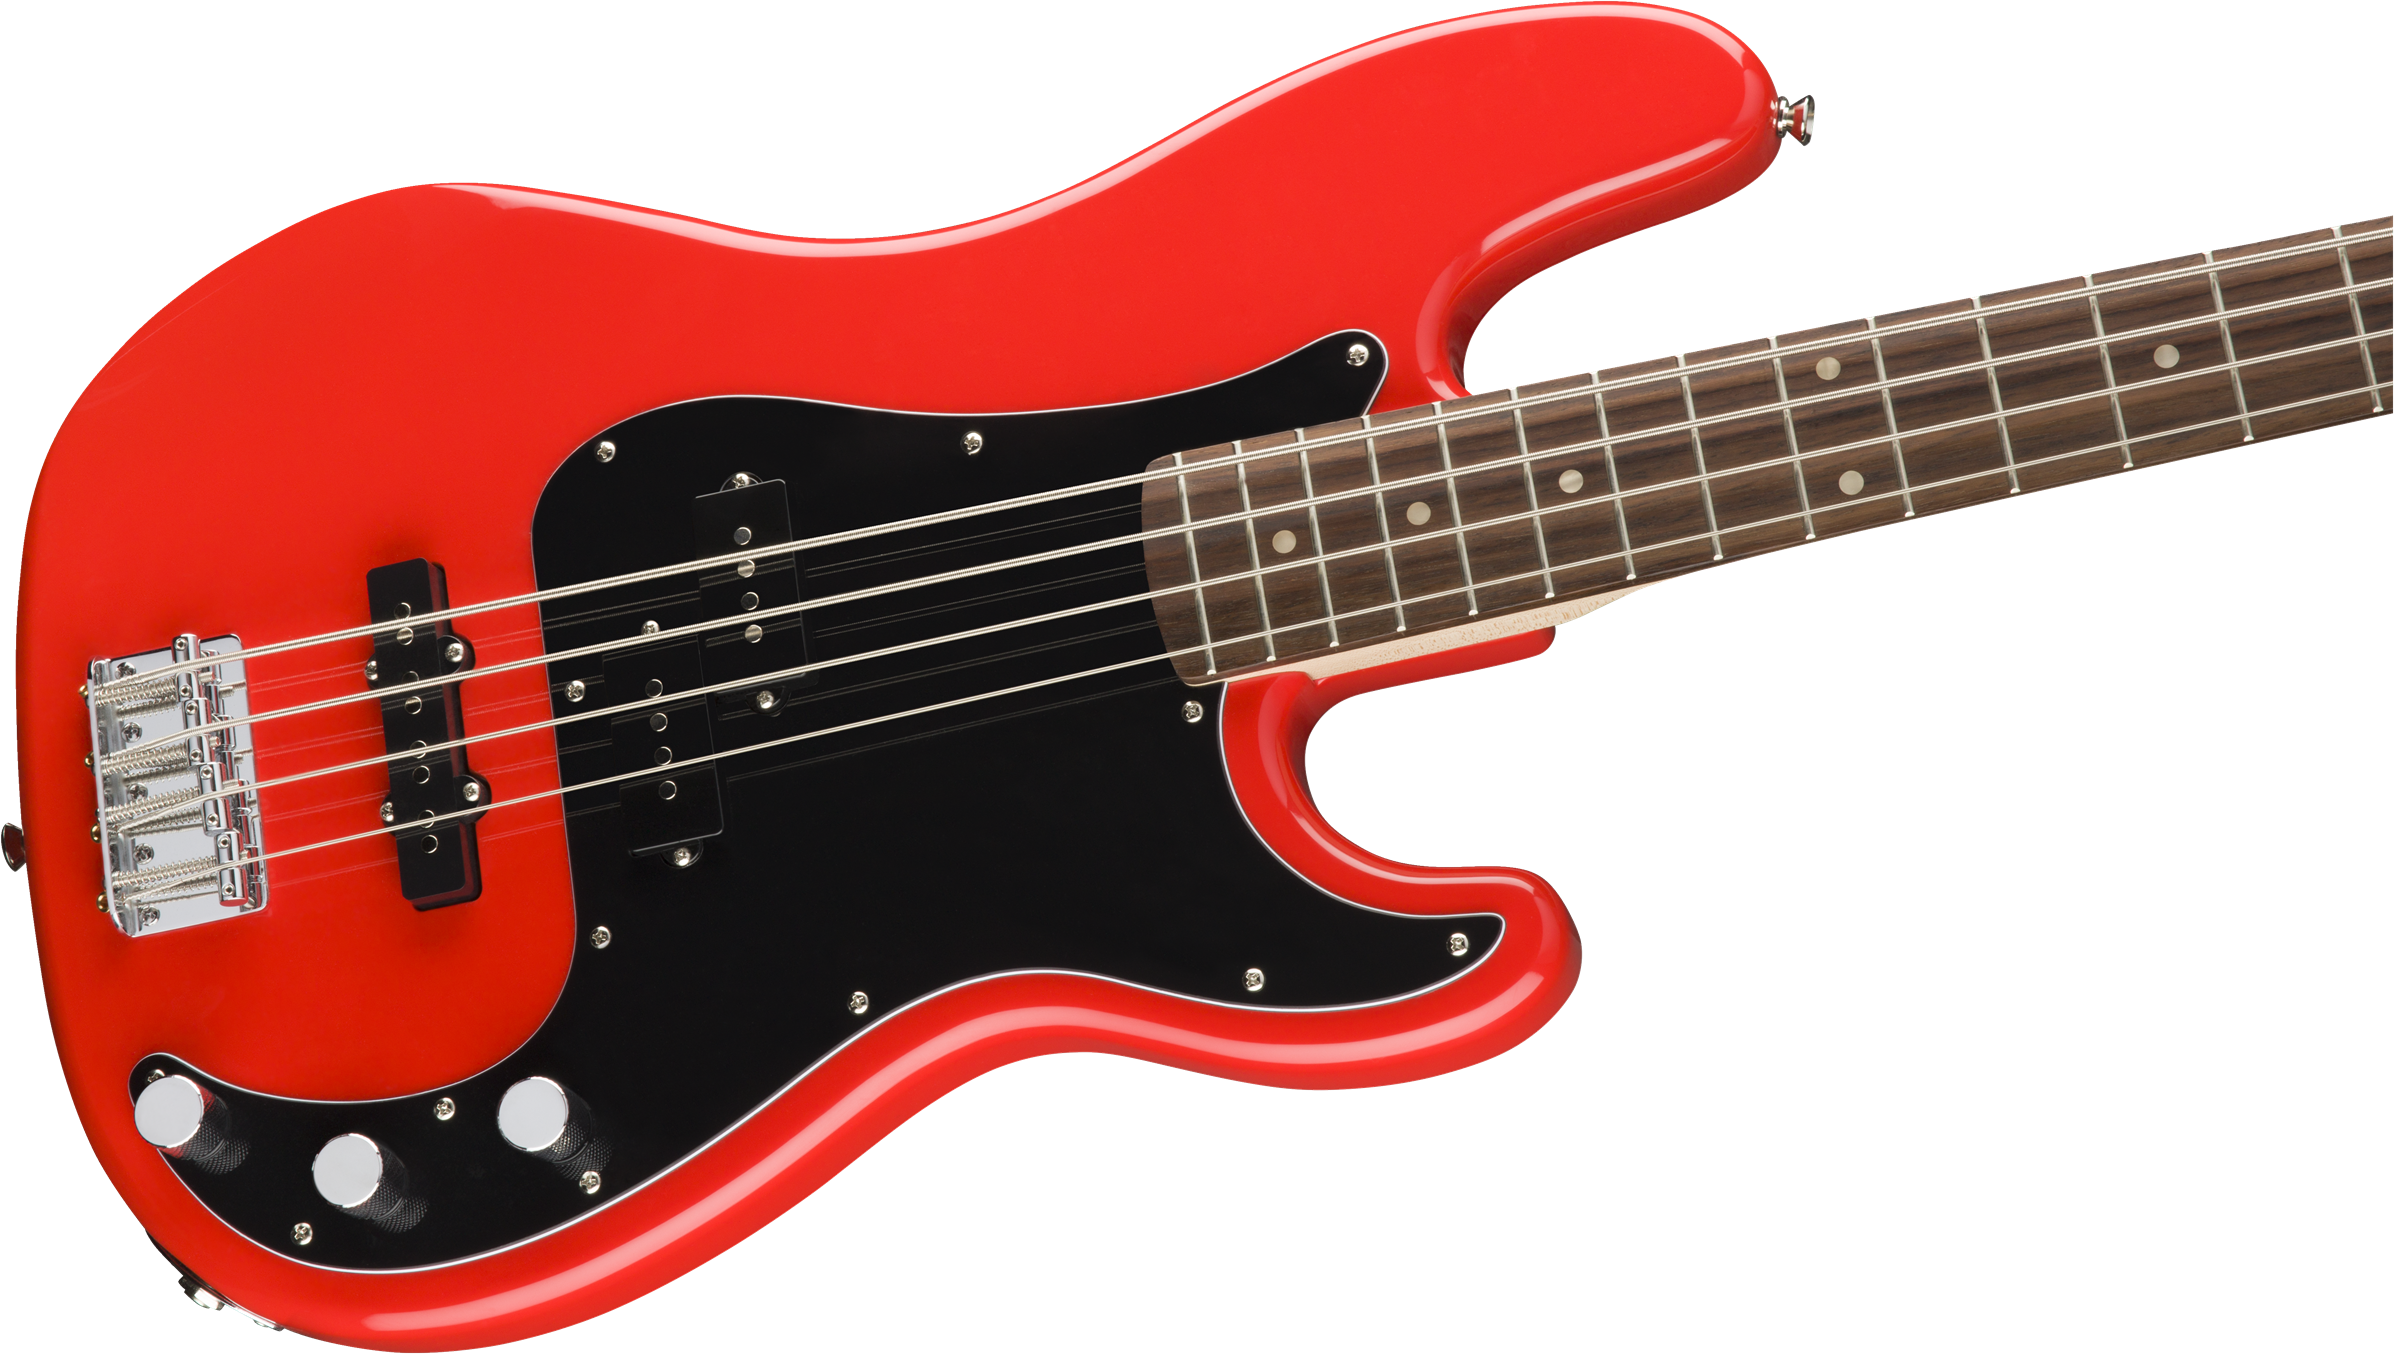 Squier Precision Bass Affinity Series Pj (lau) - Race Red - Solidbody E-bass - Variation 2